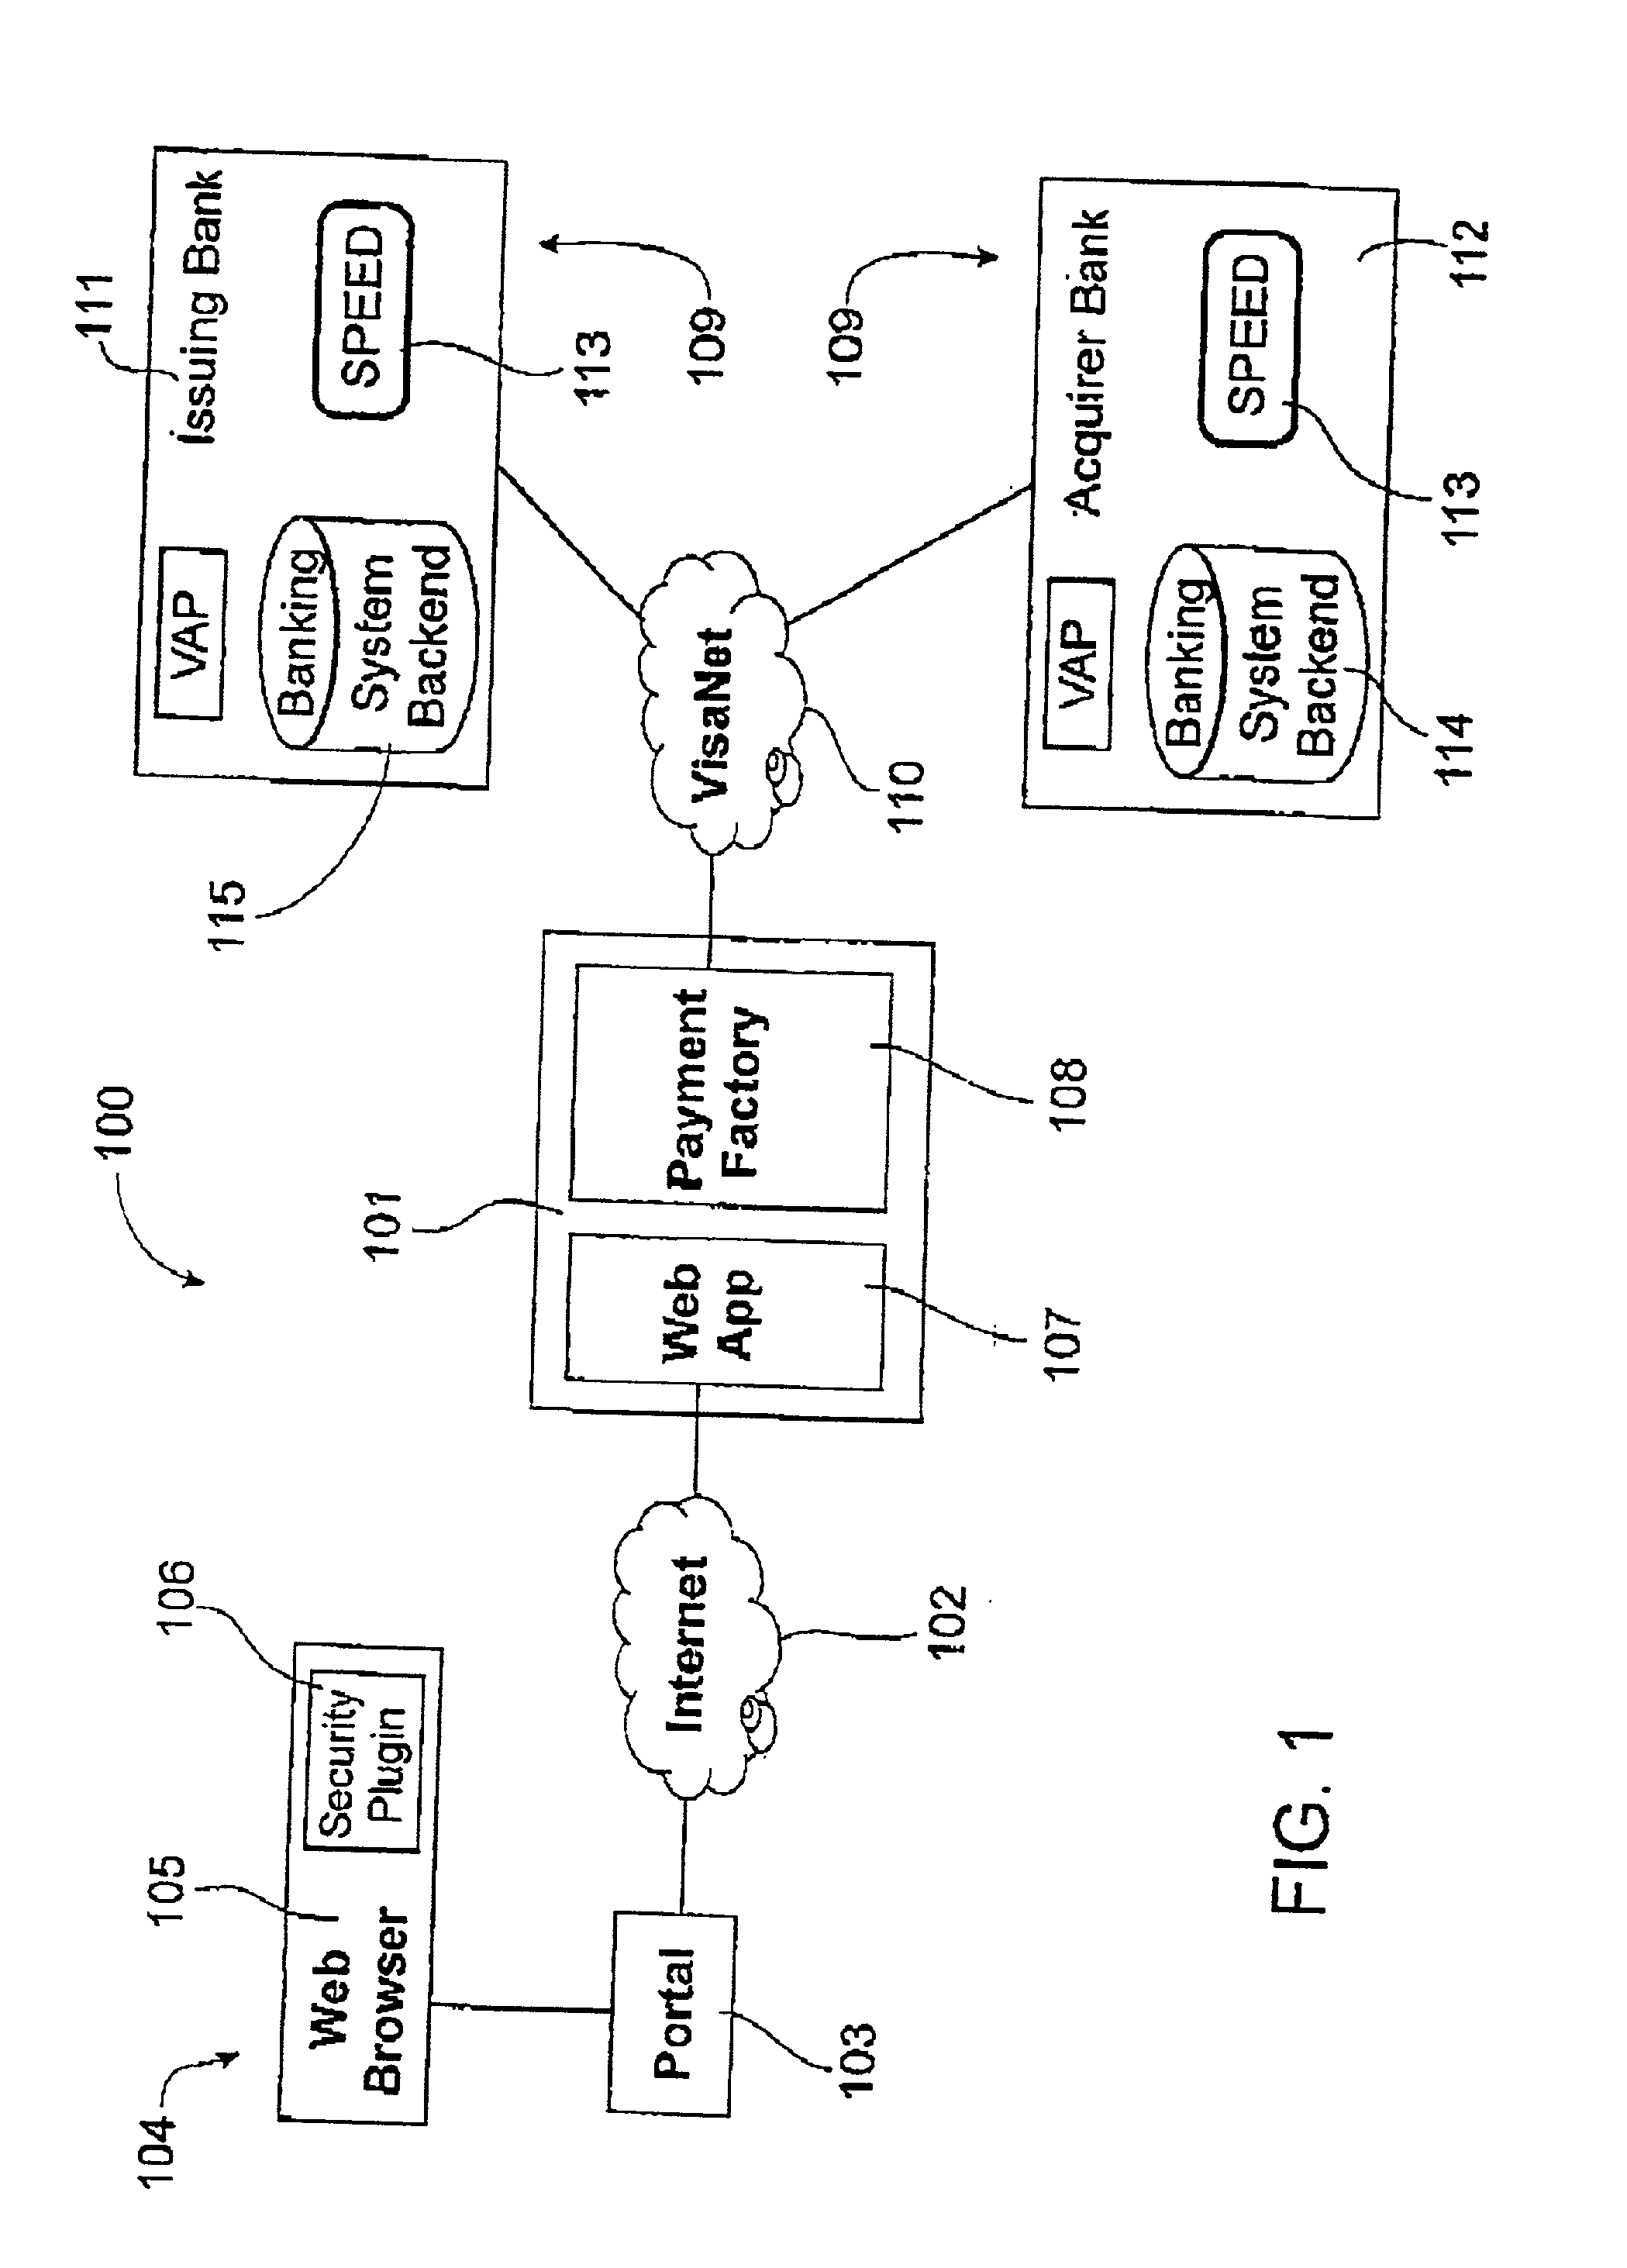 Electronic funds transfer system for processing multiple currency transactions